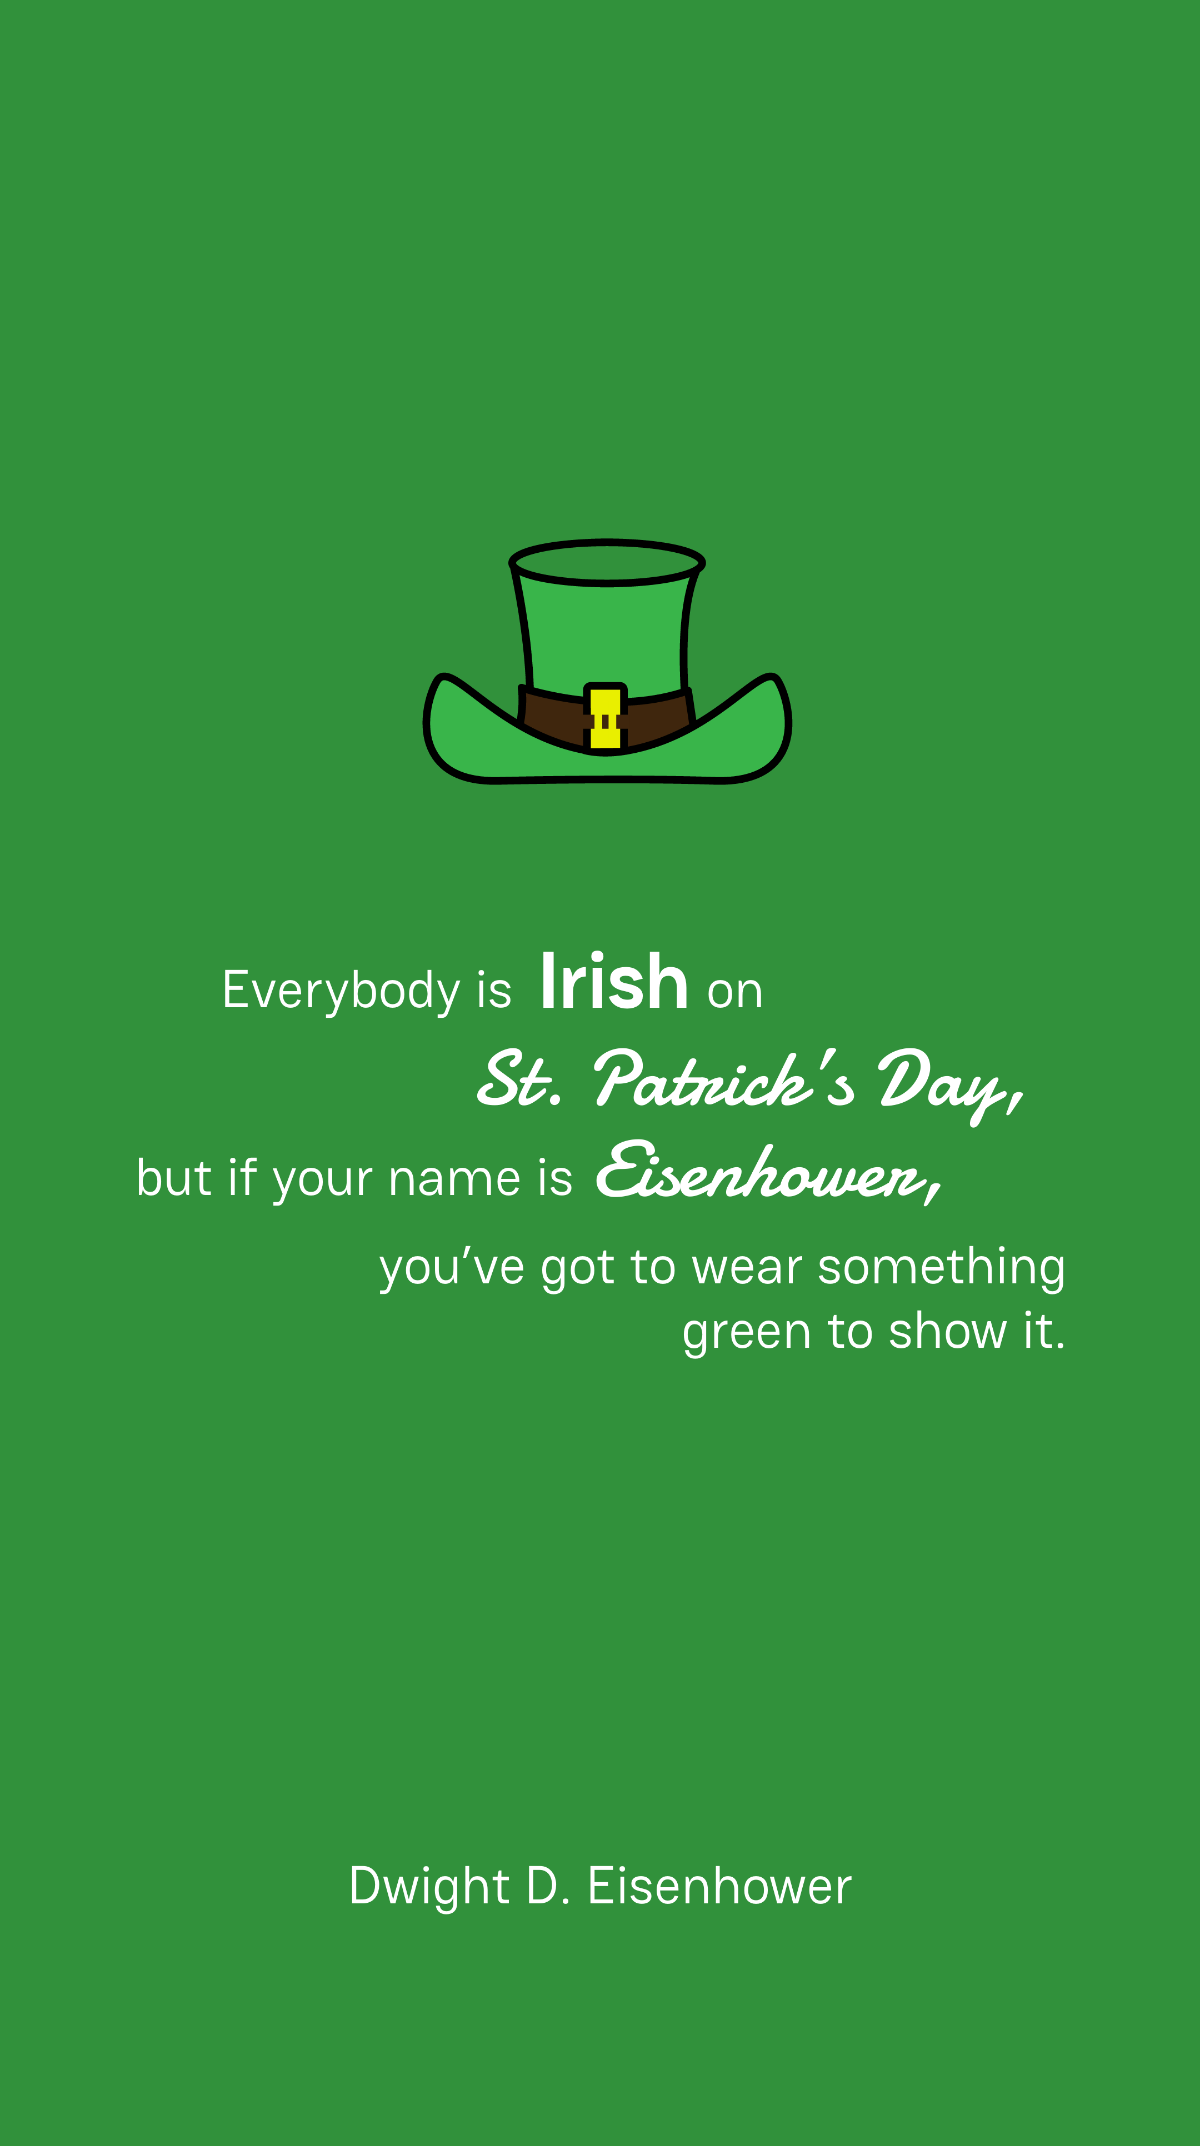 Dwight D. Eisenhower - Everybody is Irish on St. Patrick’s Day, but if your name is Eisenhower, you’ve got to wear something green to show it. Template